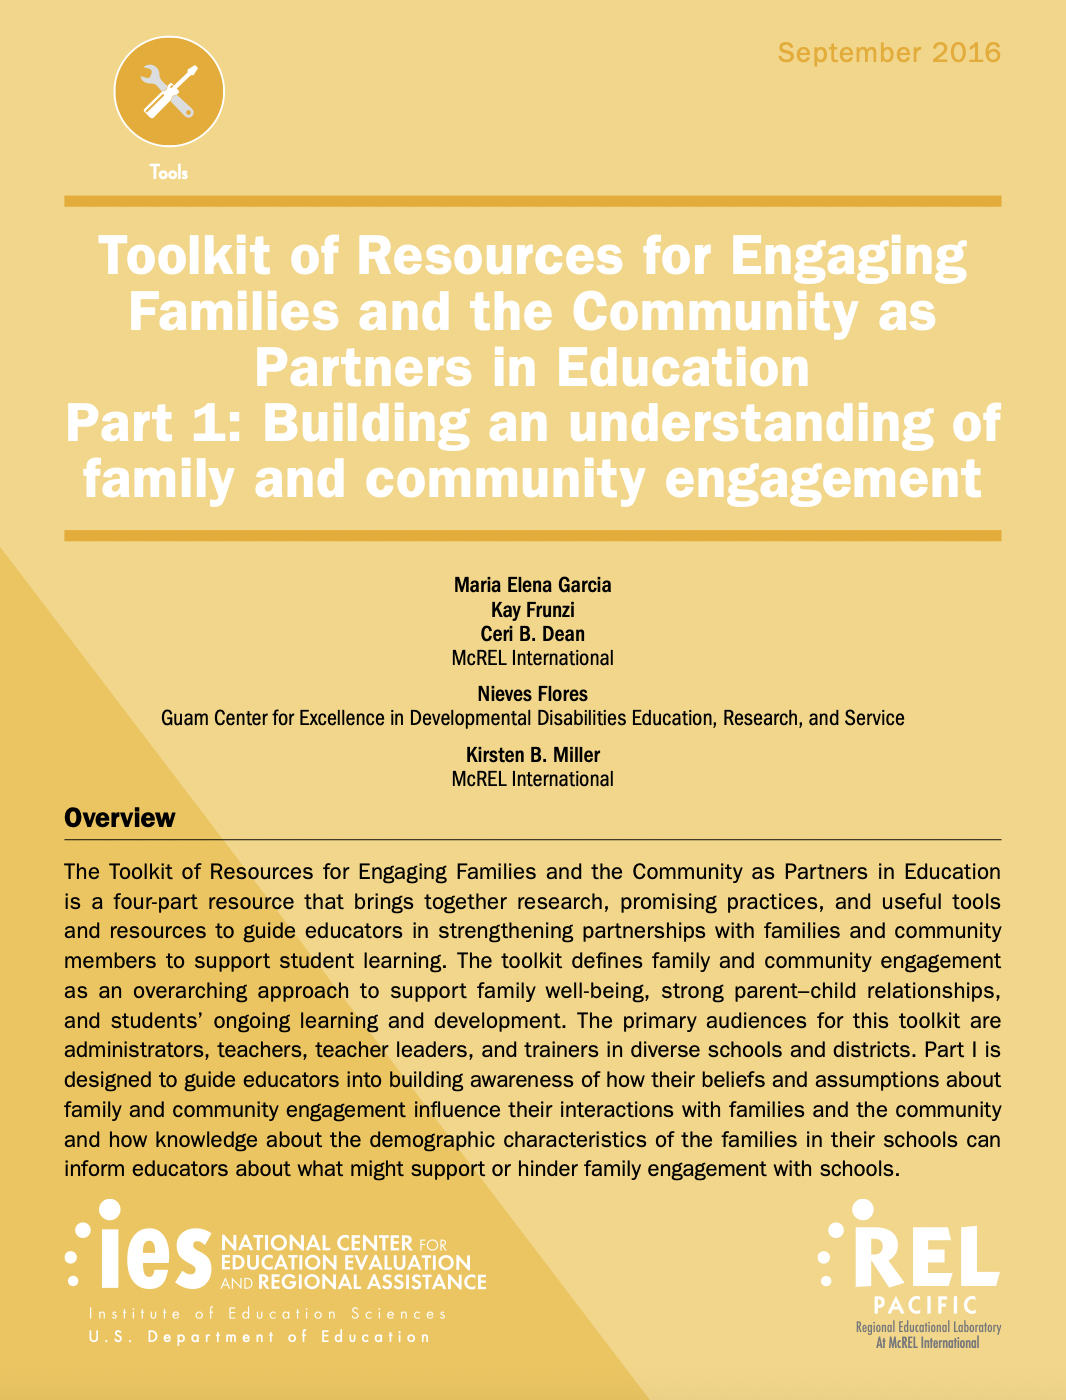 Toolkit of Resources for Engaging Families and the Community Partners in Education